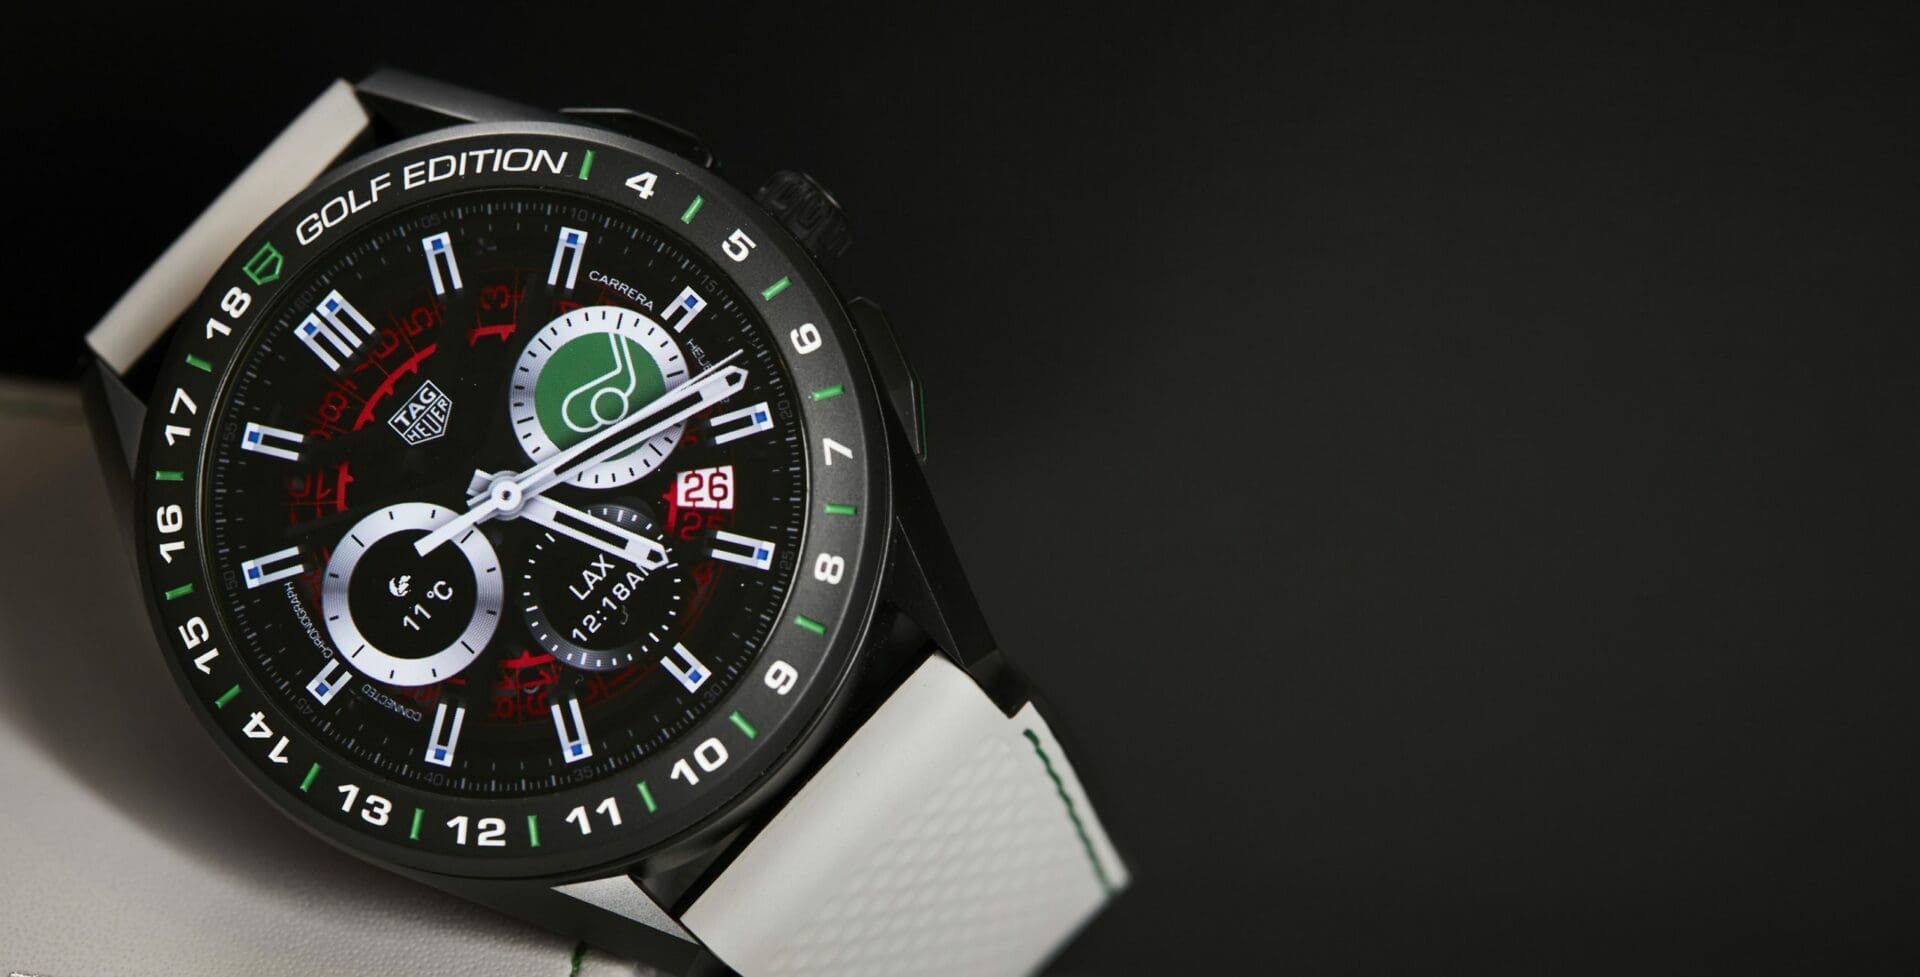 VIDEO: A golf performance coach who trains the stars rates the new TAG Heuer Connected Golf Edition